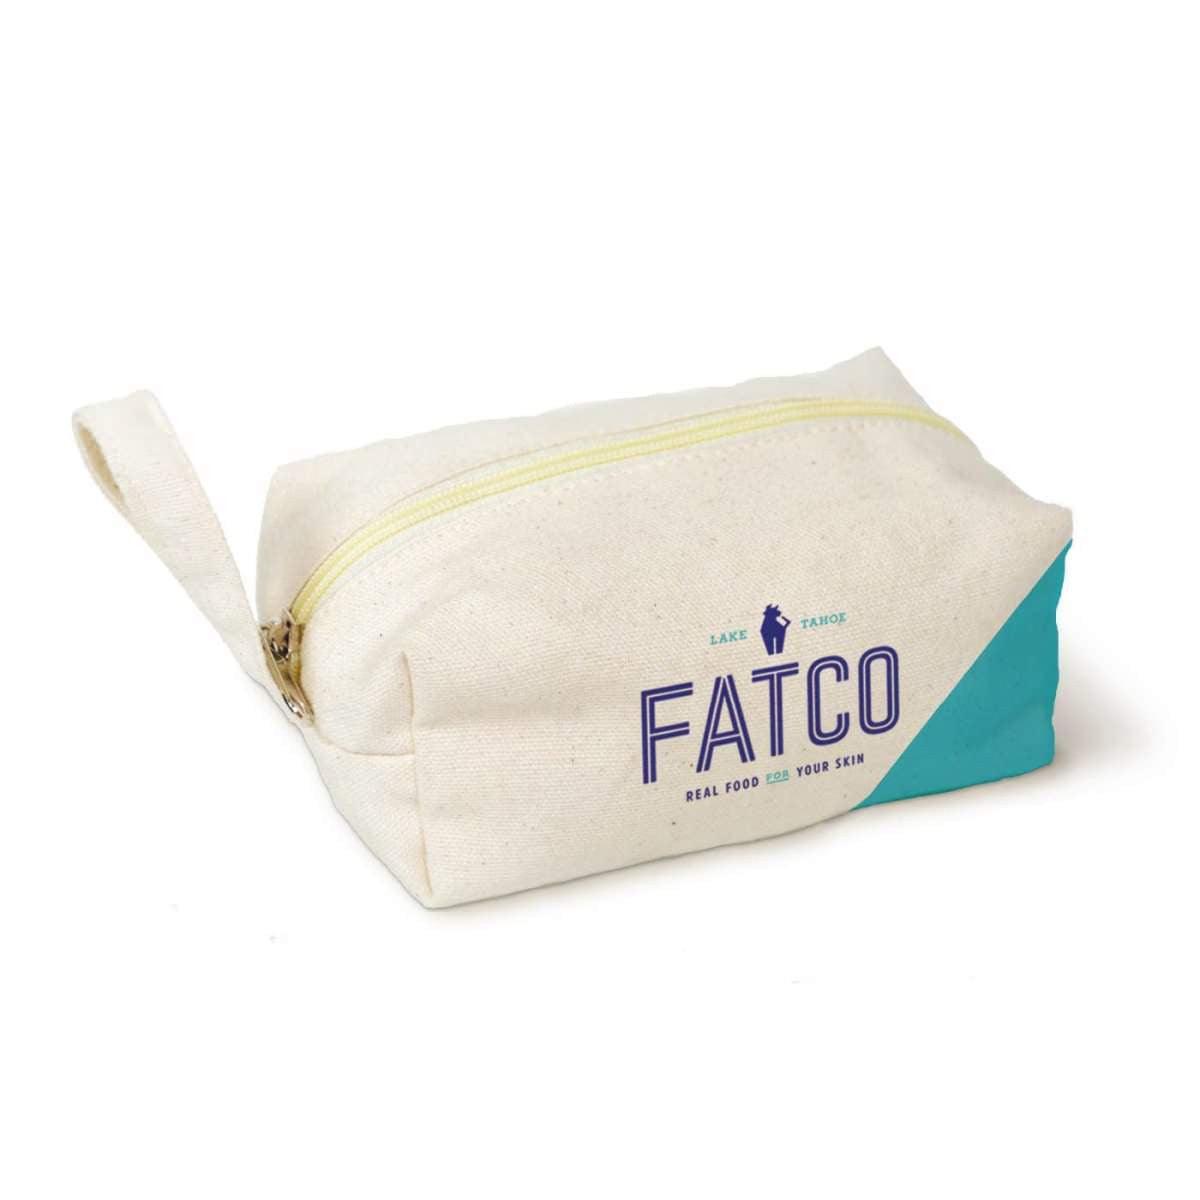 Facial Skincare Set For Normal Skin, Pregnancy Safe by FATCO Skincare Products - Vysn